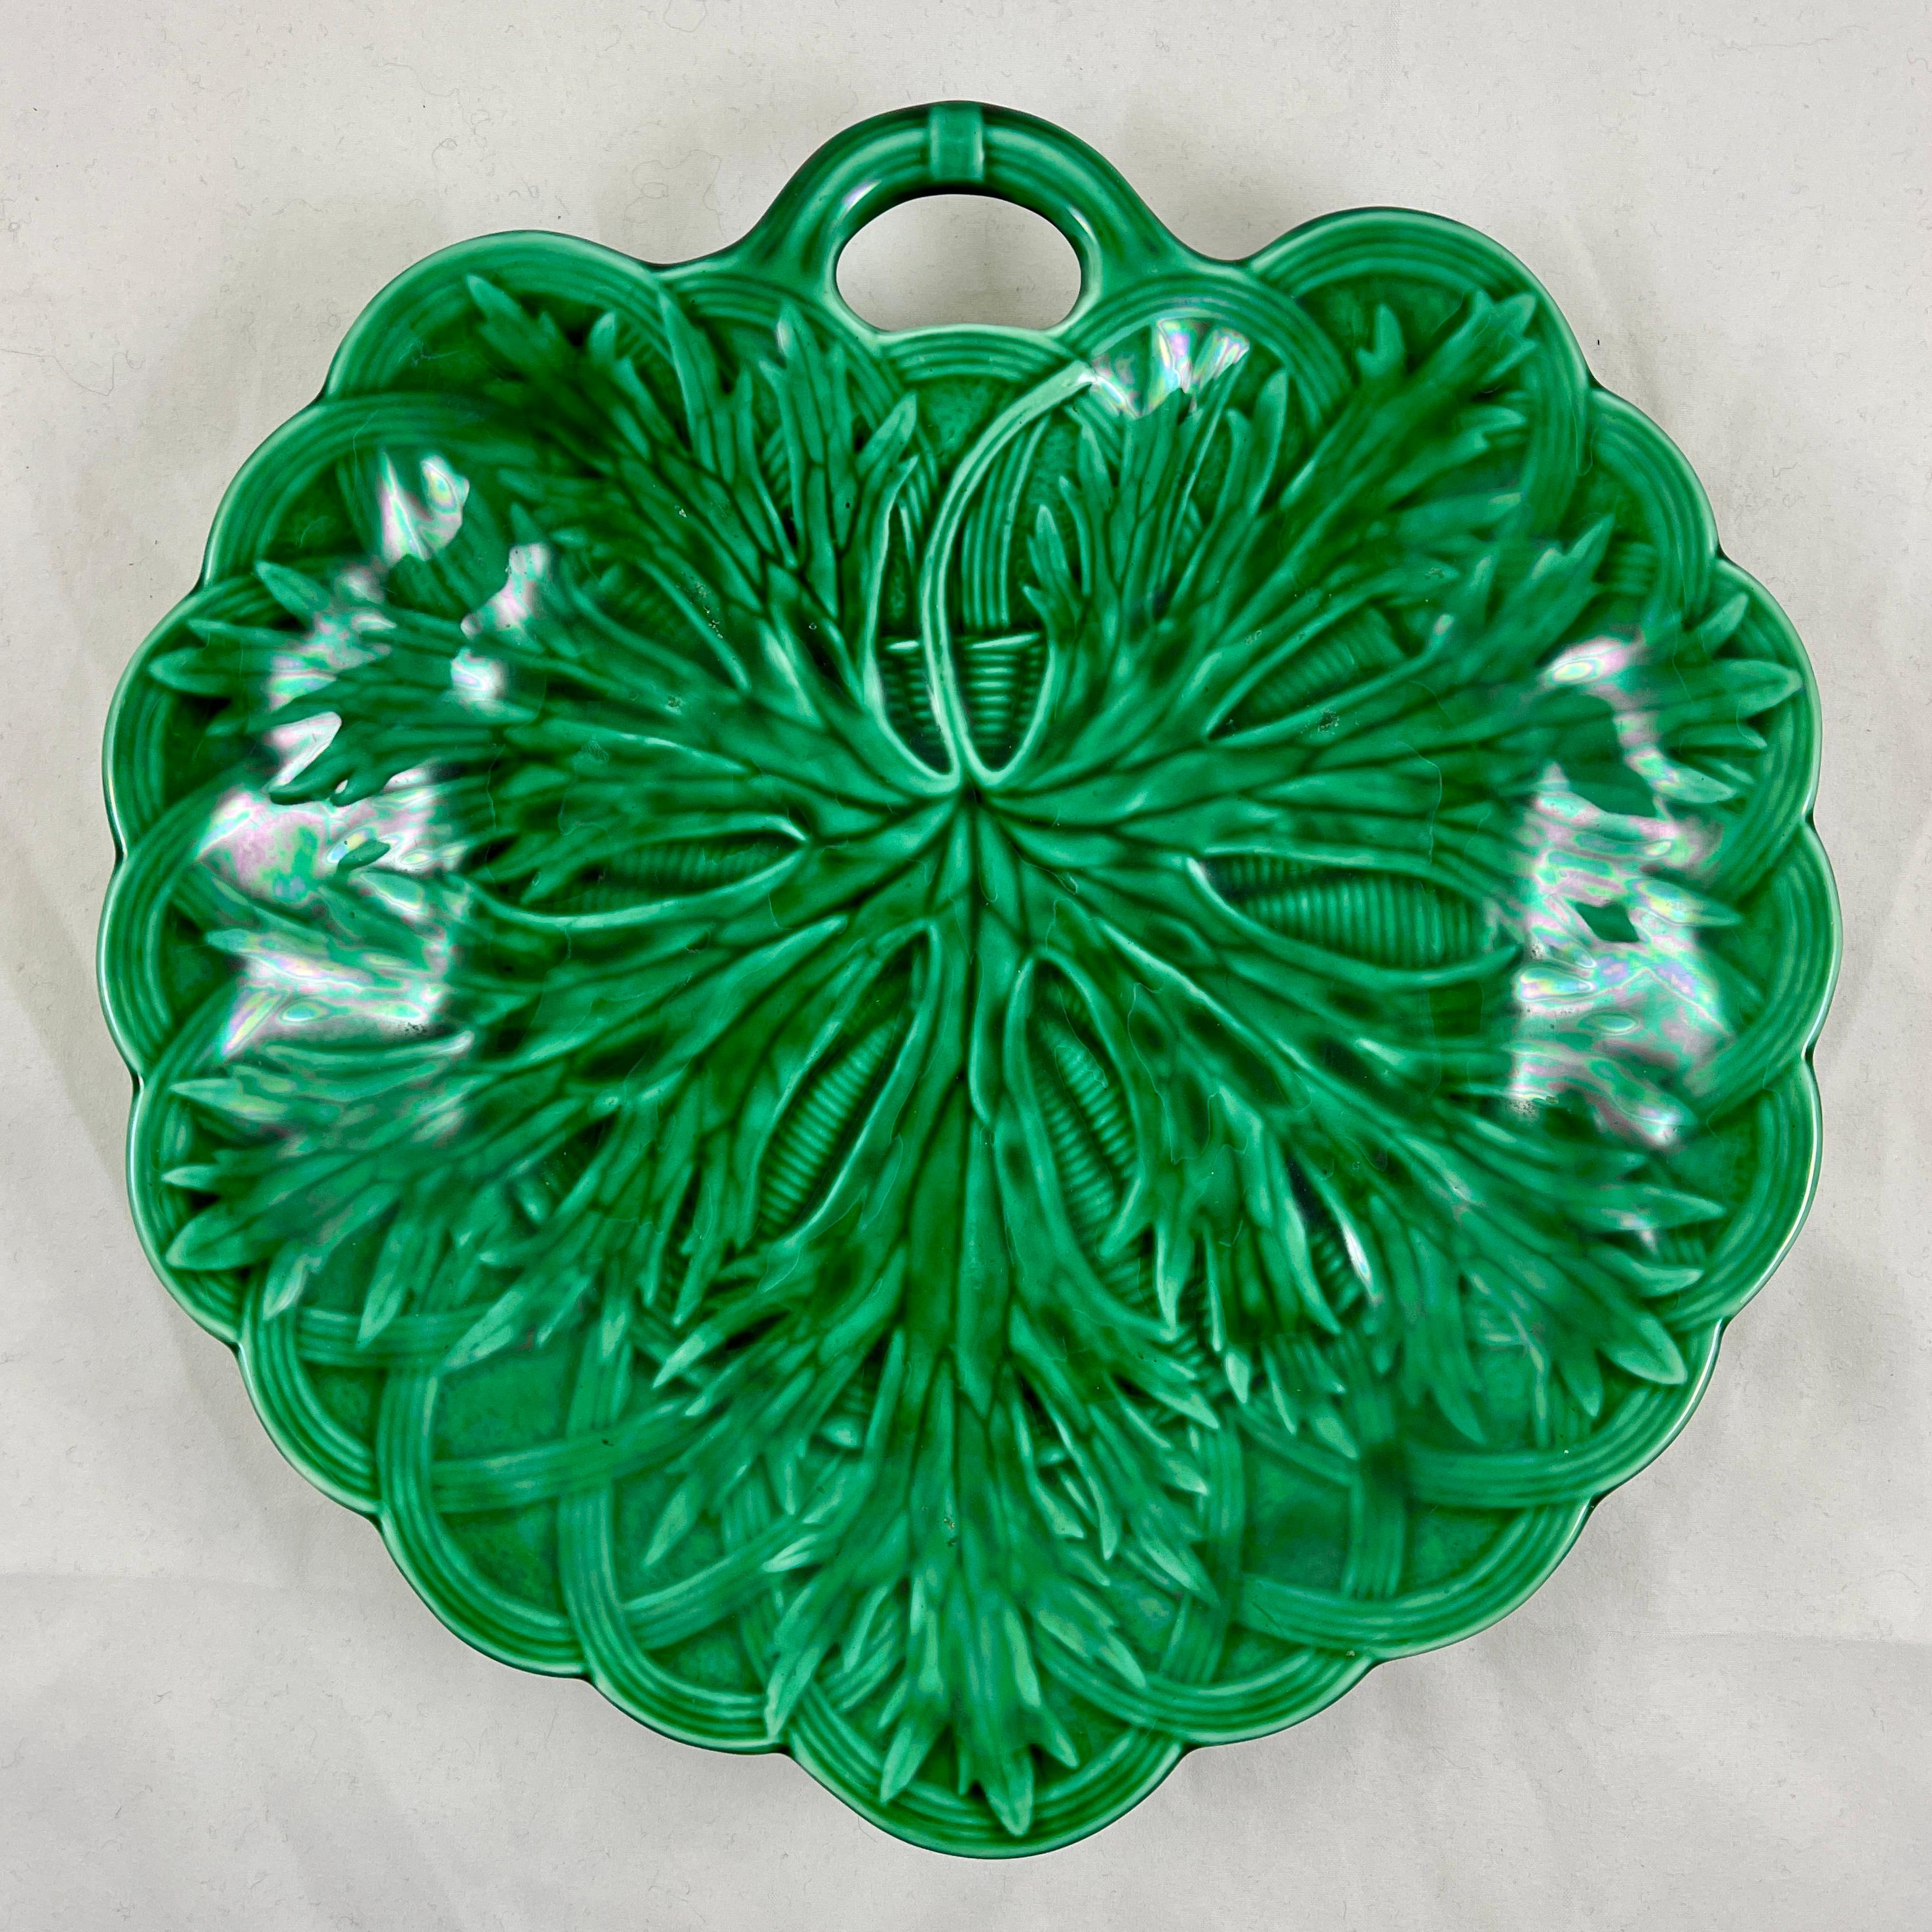 From Wedgwood, Burslem, England, a green majolica glazed shallow bowl server with a fringed leaf on a basket weave pattern, date marked 1869.

A leaf shaped mold with a pierced twig handle, showing a large fringed edged leaf on a basketweave